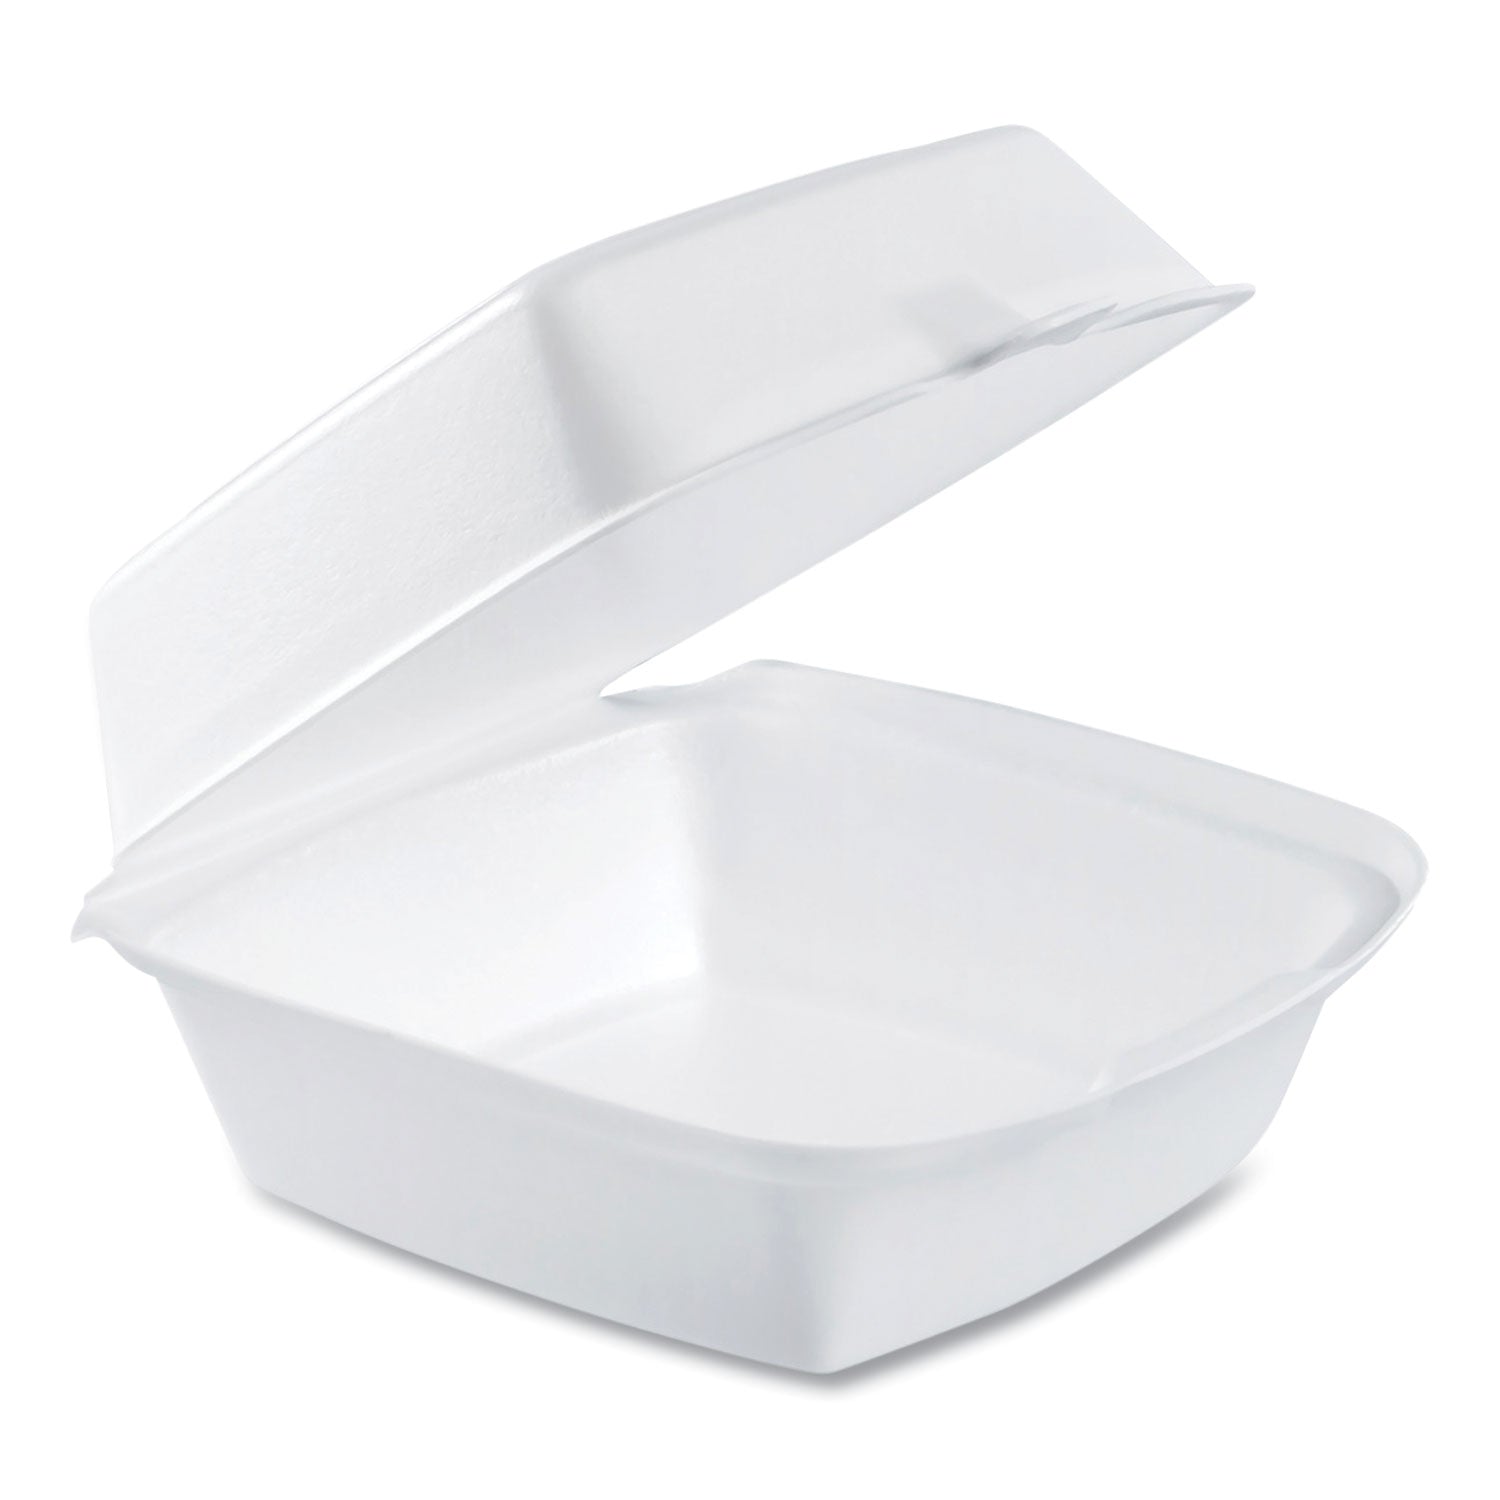 Foam Hinged Lid Containers, 6 x 5.78 x 3, White, 500/Carton - 